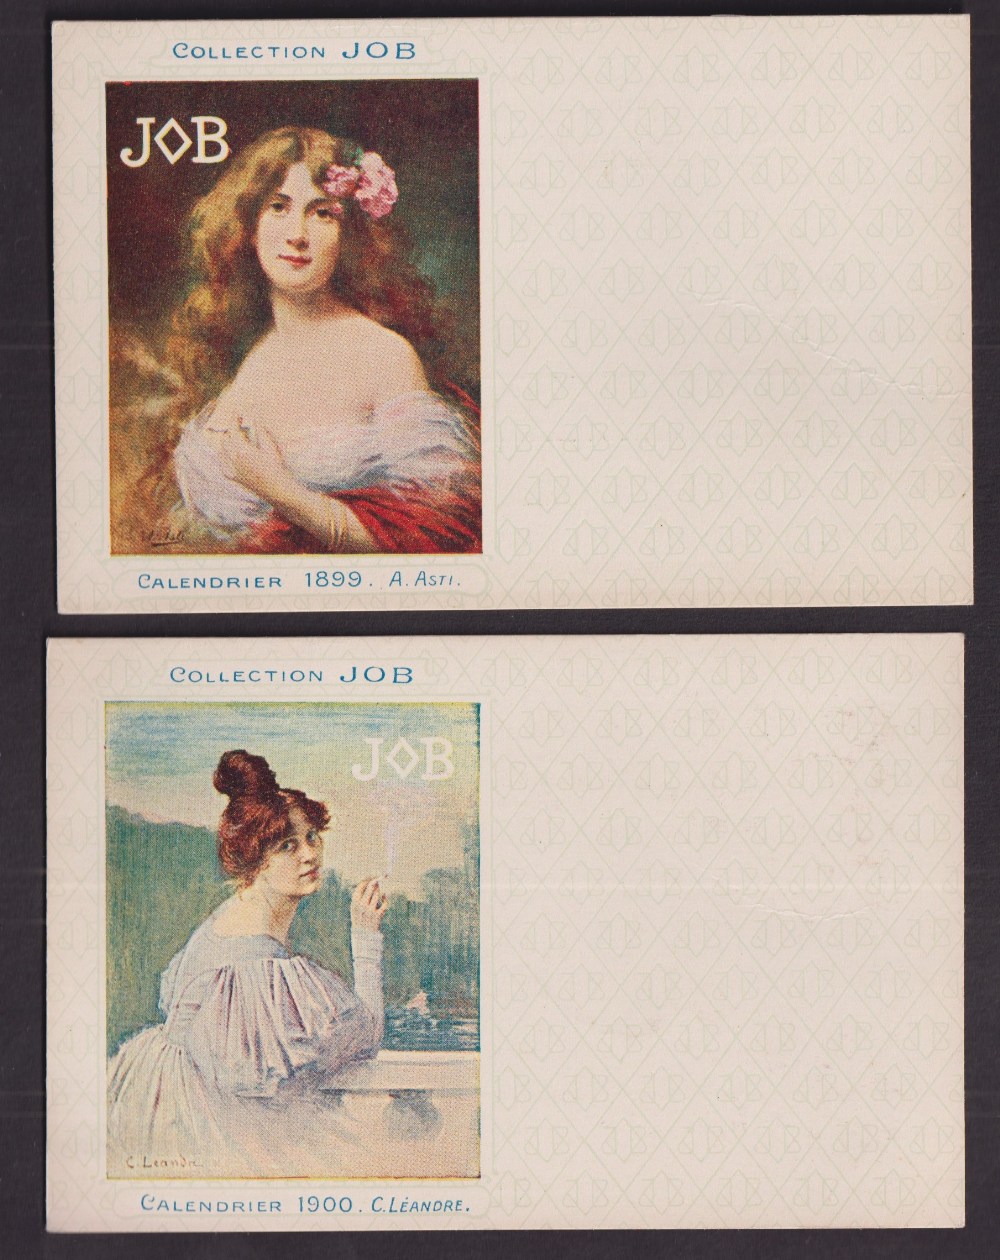 Tobacco advertising, Job, two postcards, Calendrier 1899 illustration by Asti & Calendrier 1900